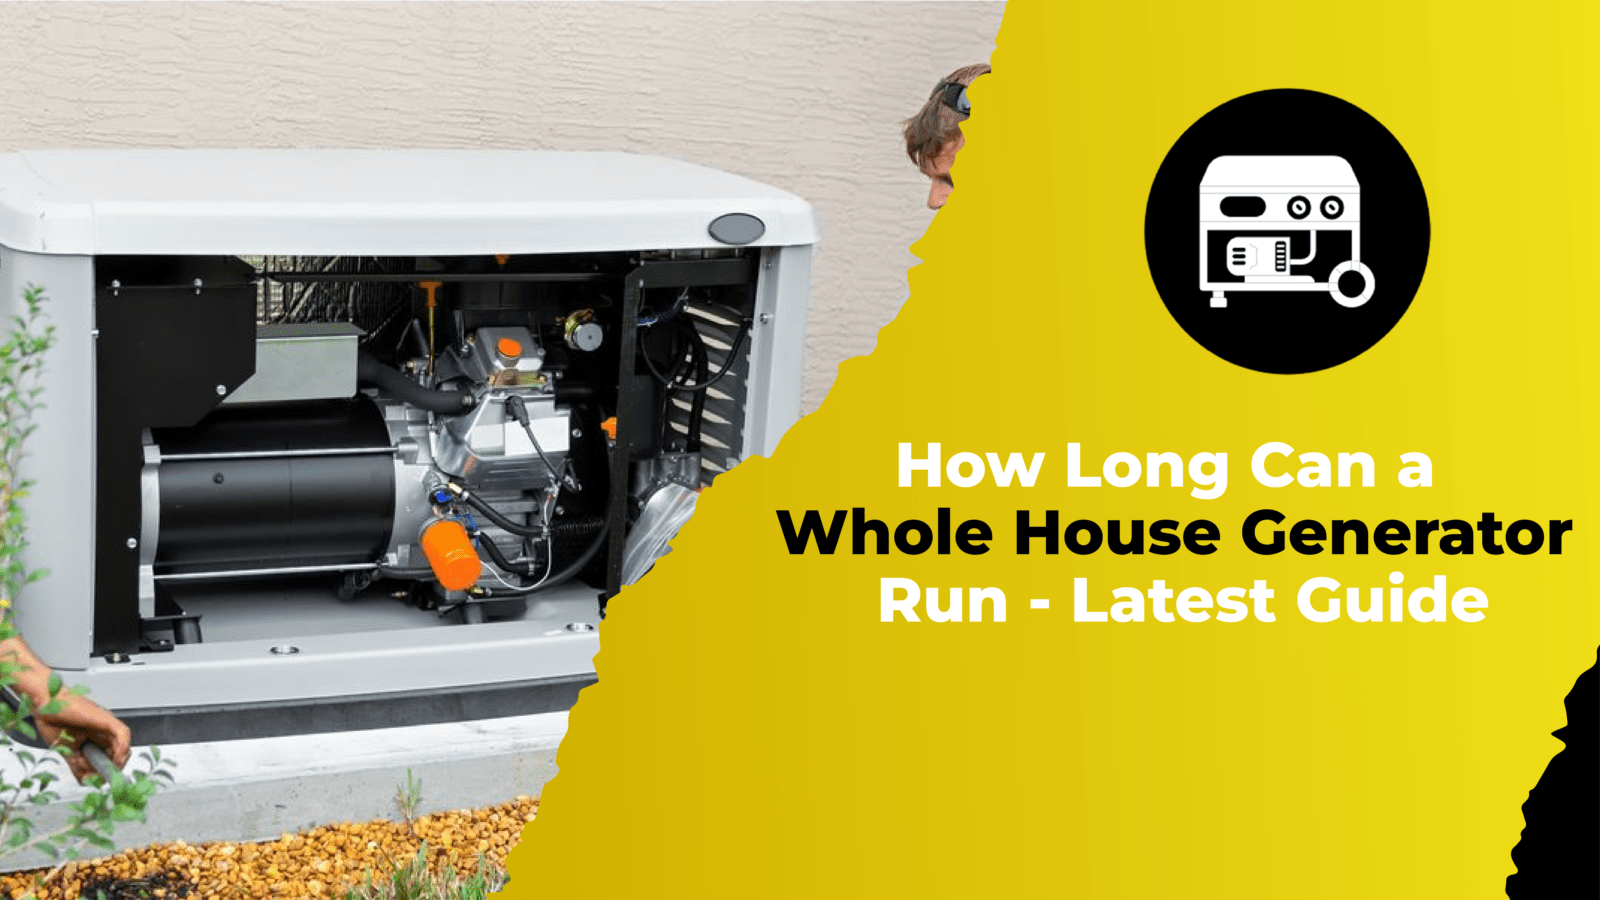 How Long Can a Whole House Generator Run - Latest Guide